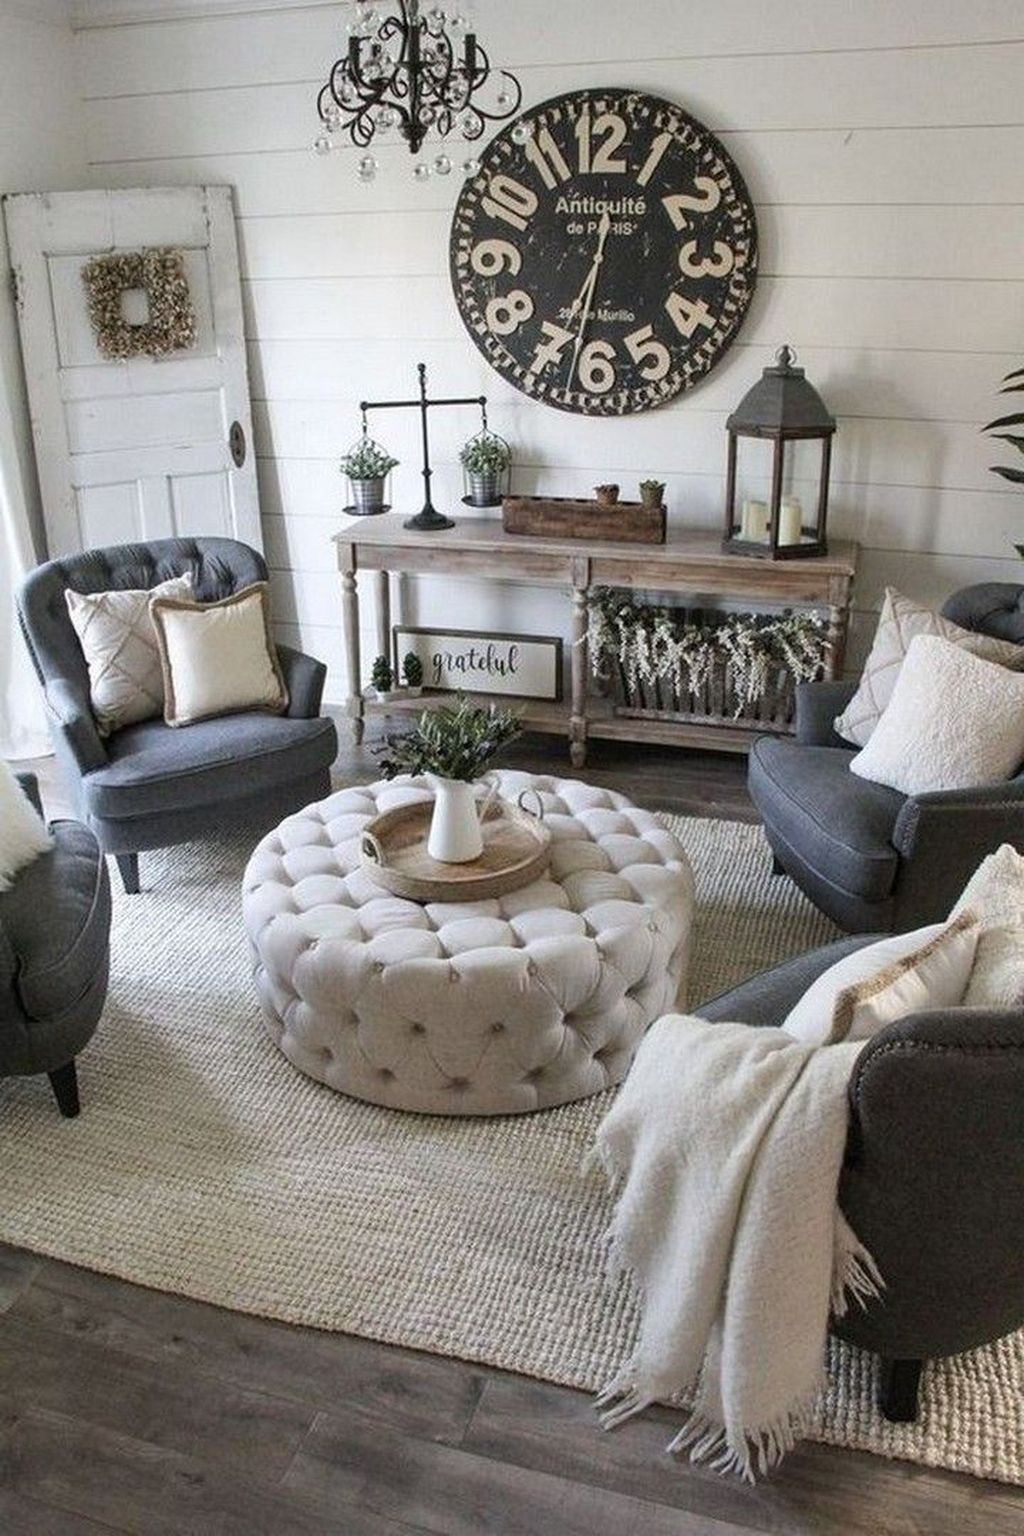 Popular Ways To Efficiently Arrange Furniture For Small Living Room 30